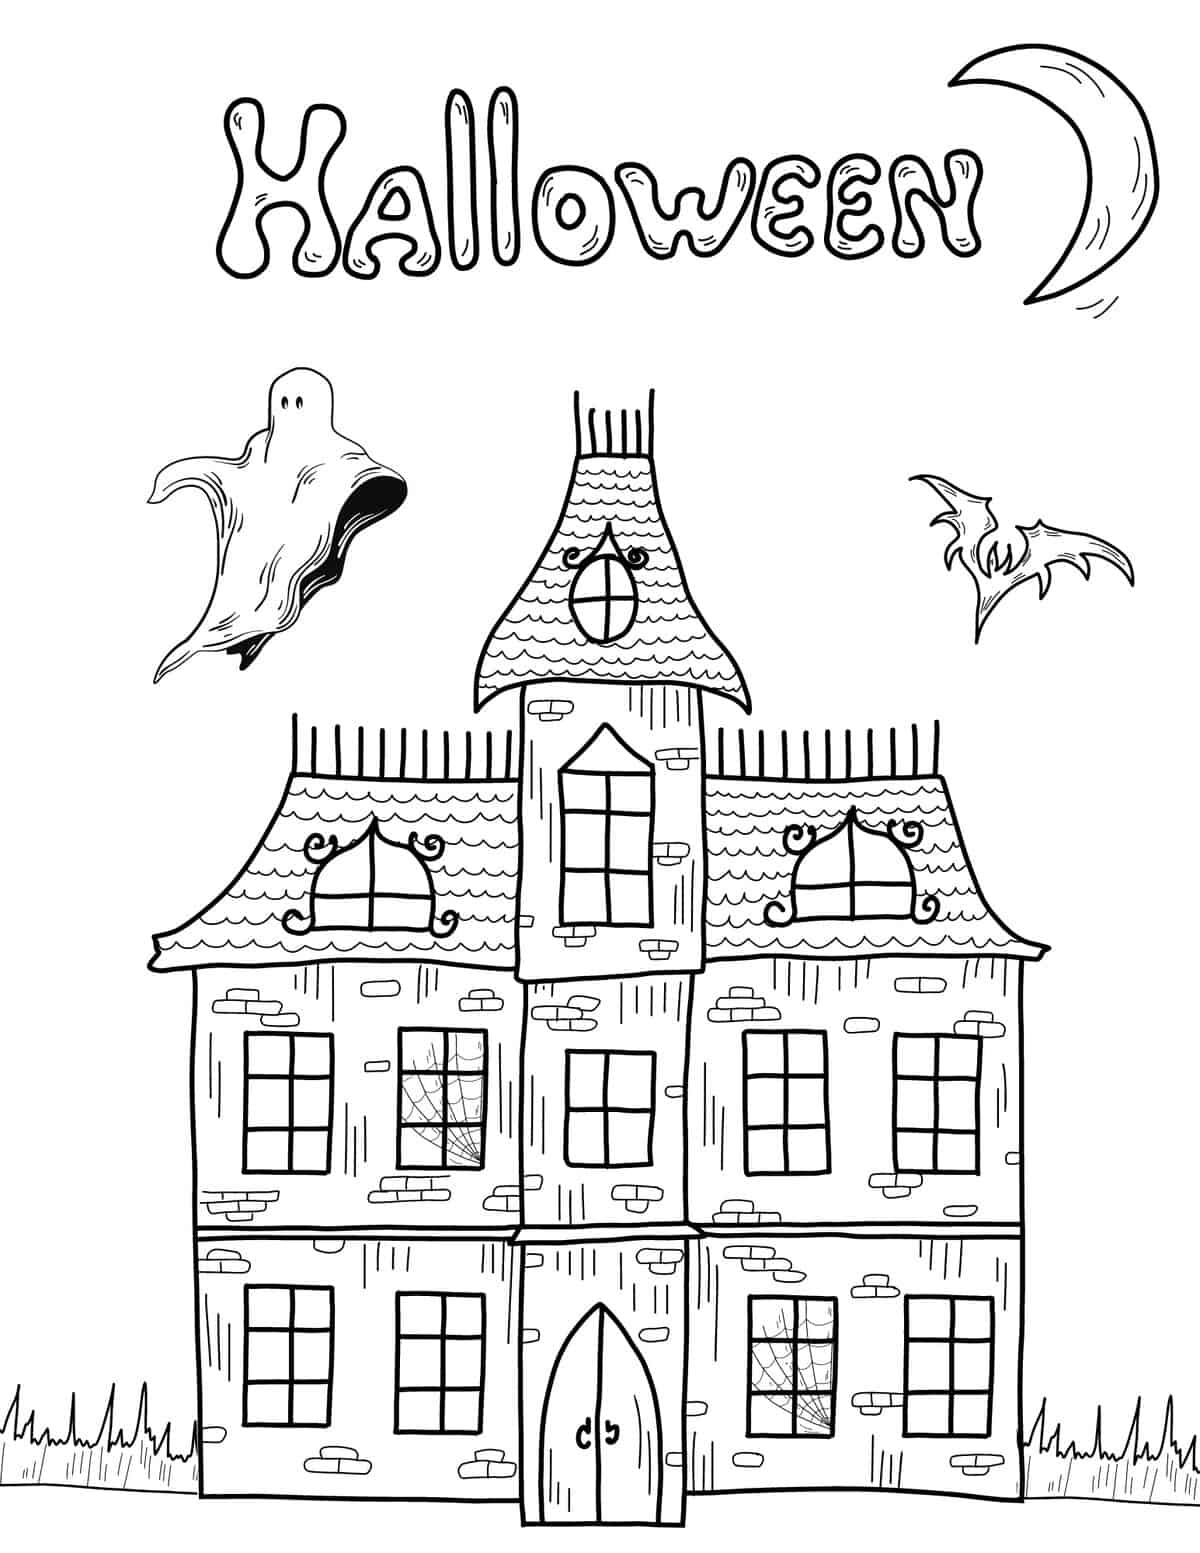 FREE Halloween Coloring Pages {CUTE!} - A Country Girl's Life